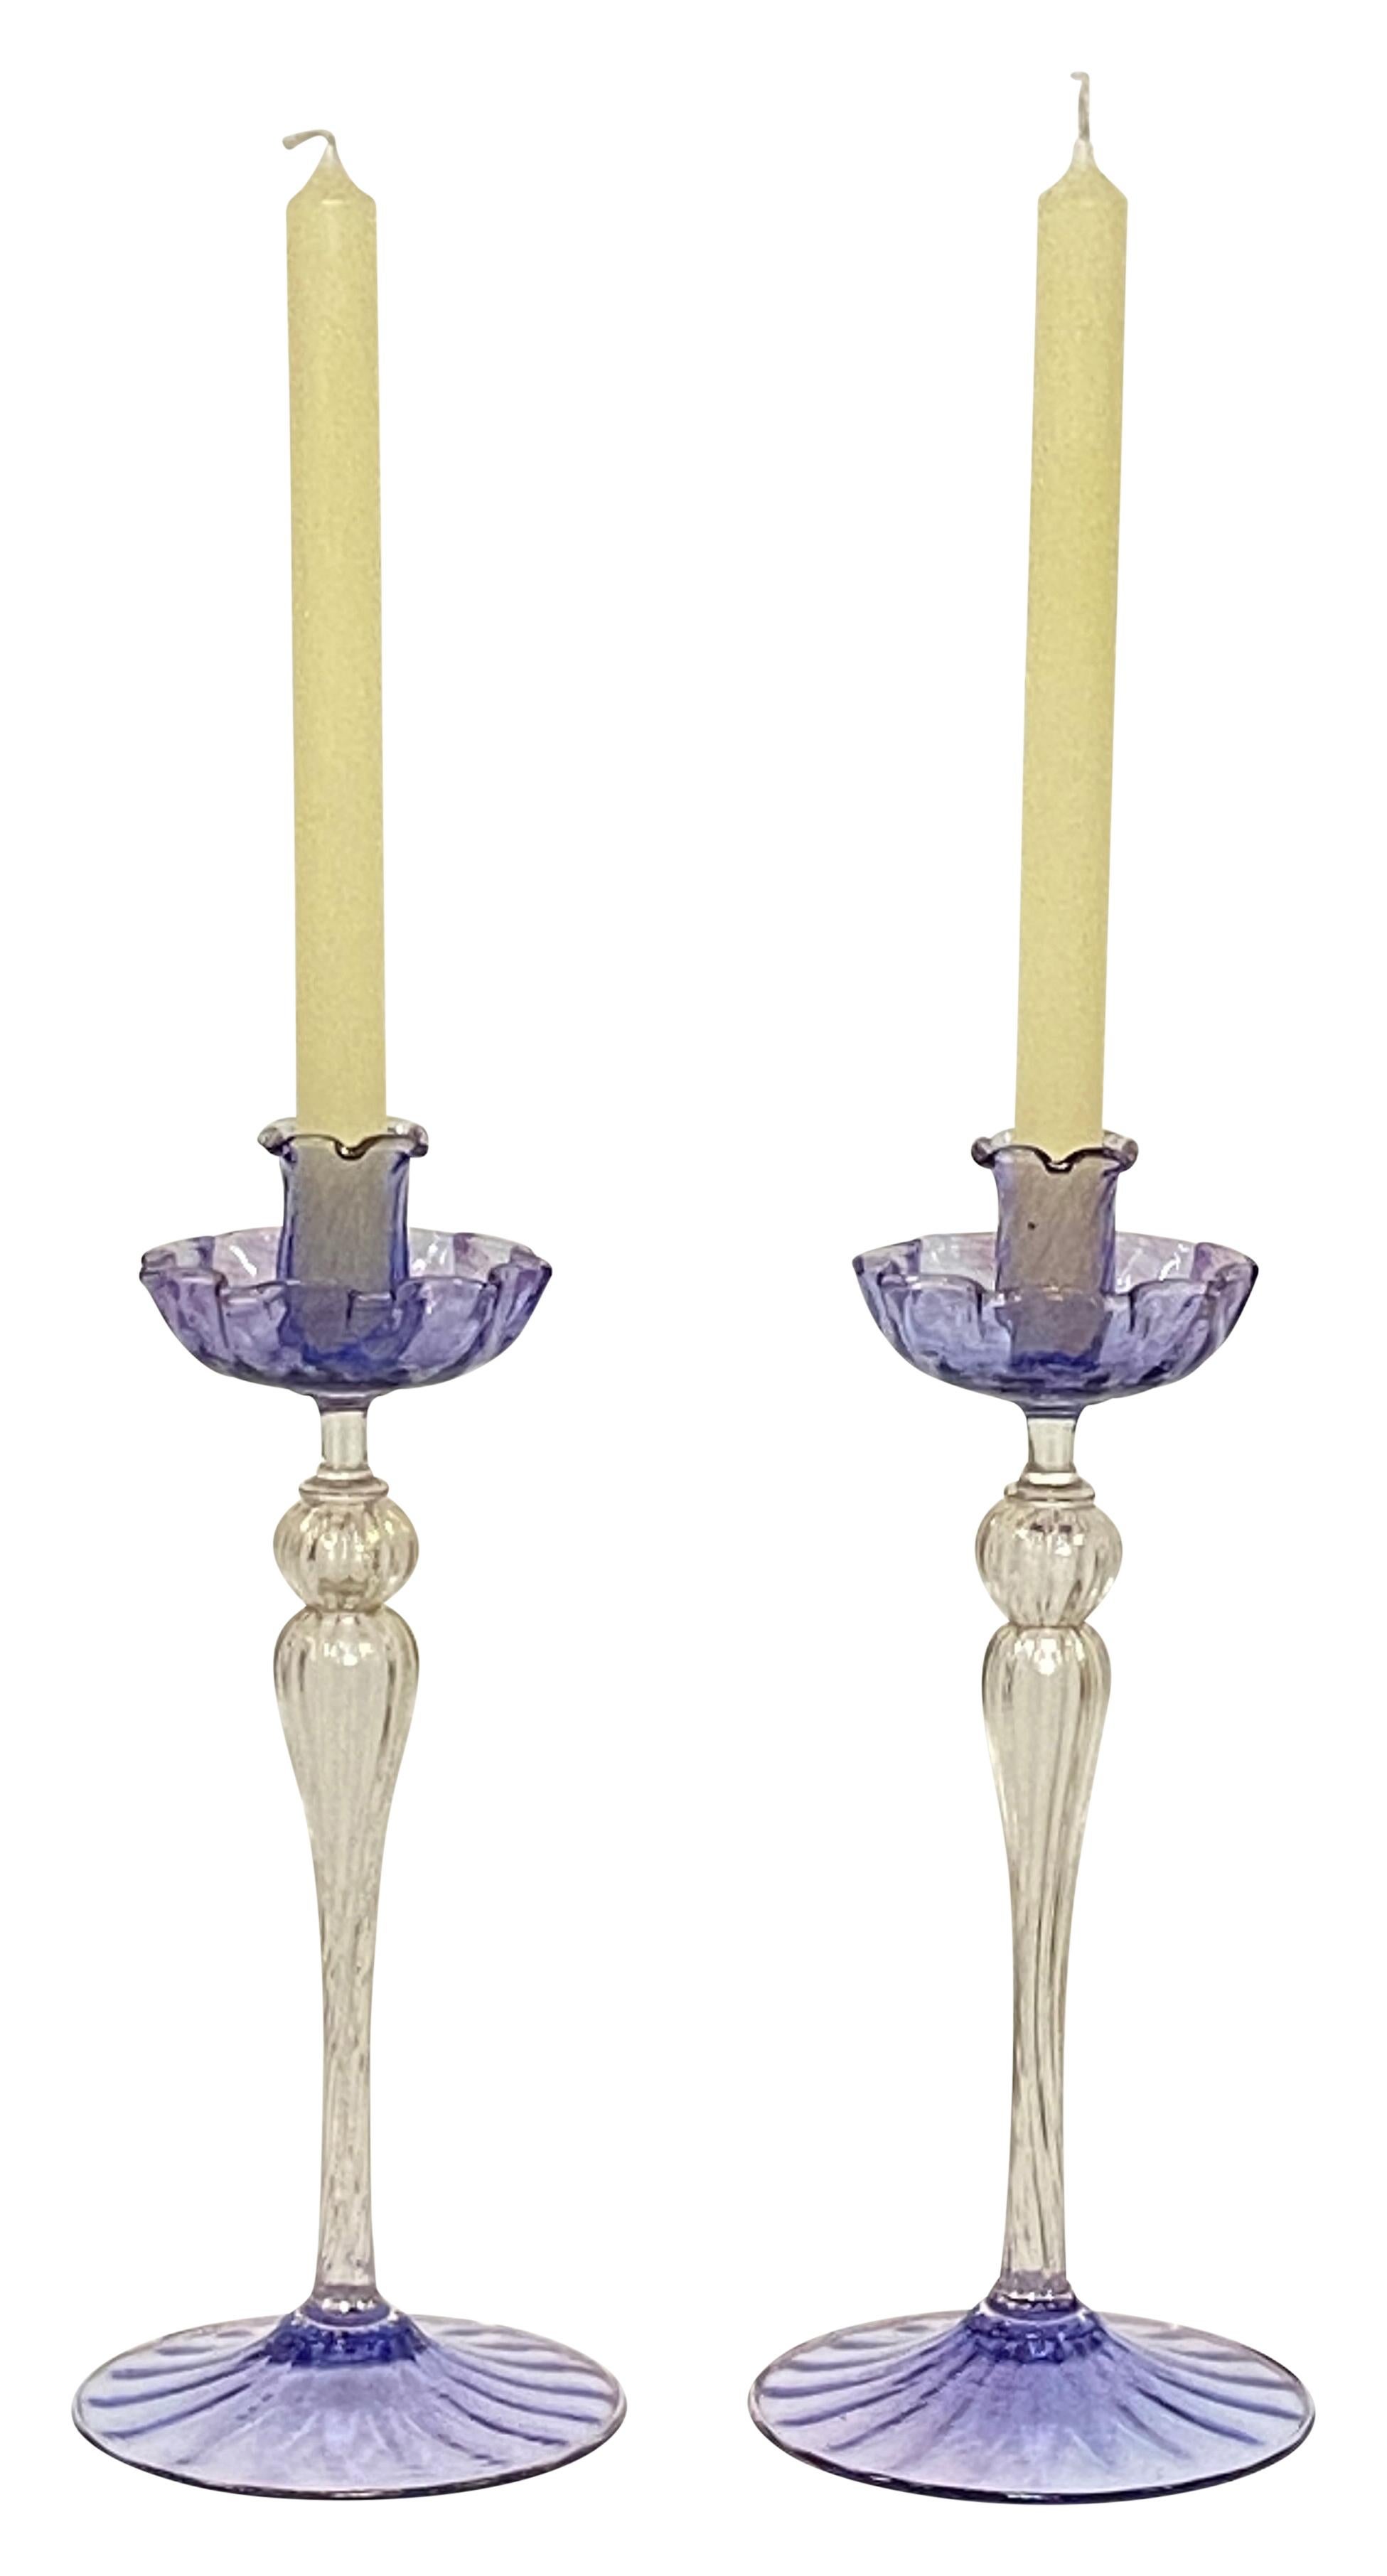 Vintage Italian Mid Century Murano Glass Candlesticks In Good Condition For Sale In San Francisco, CA